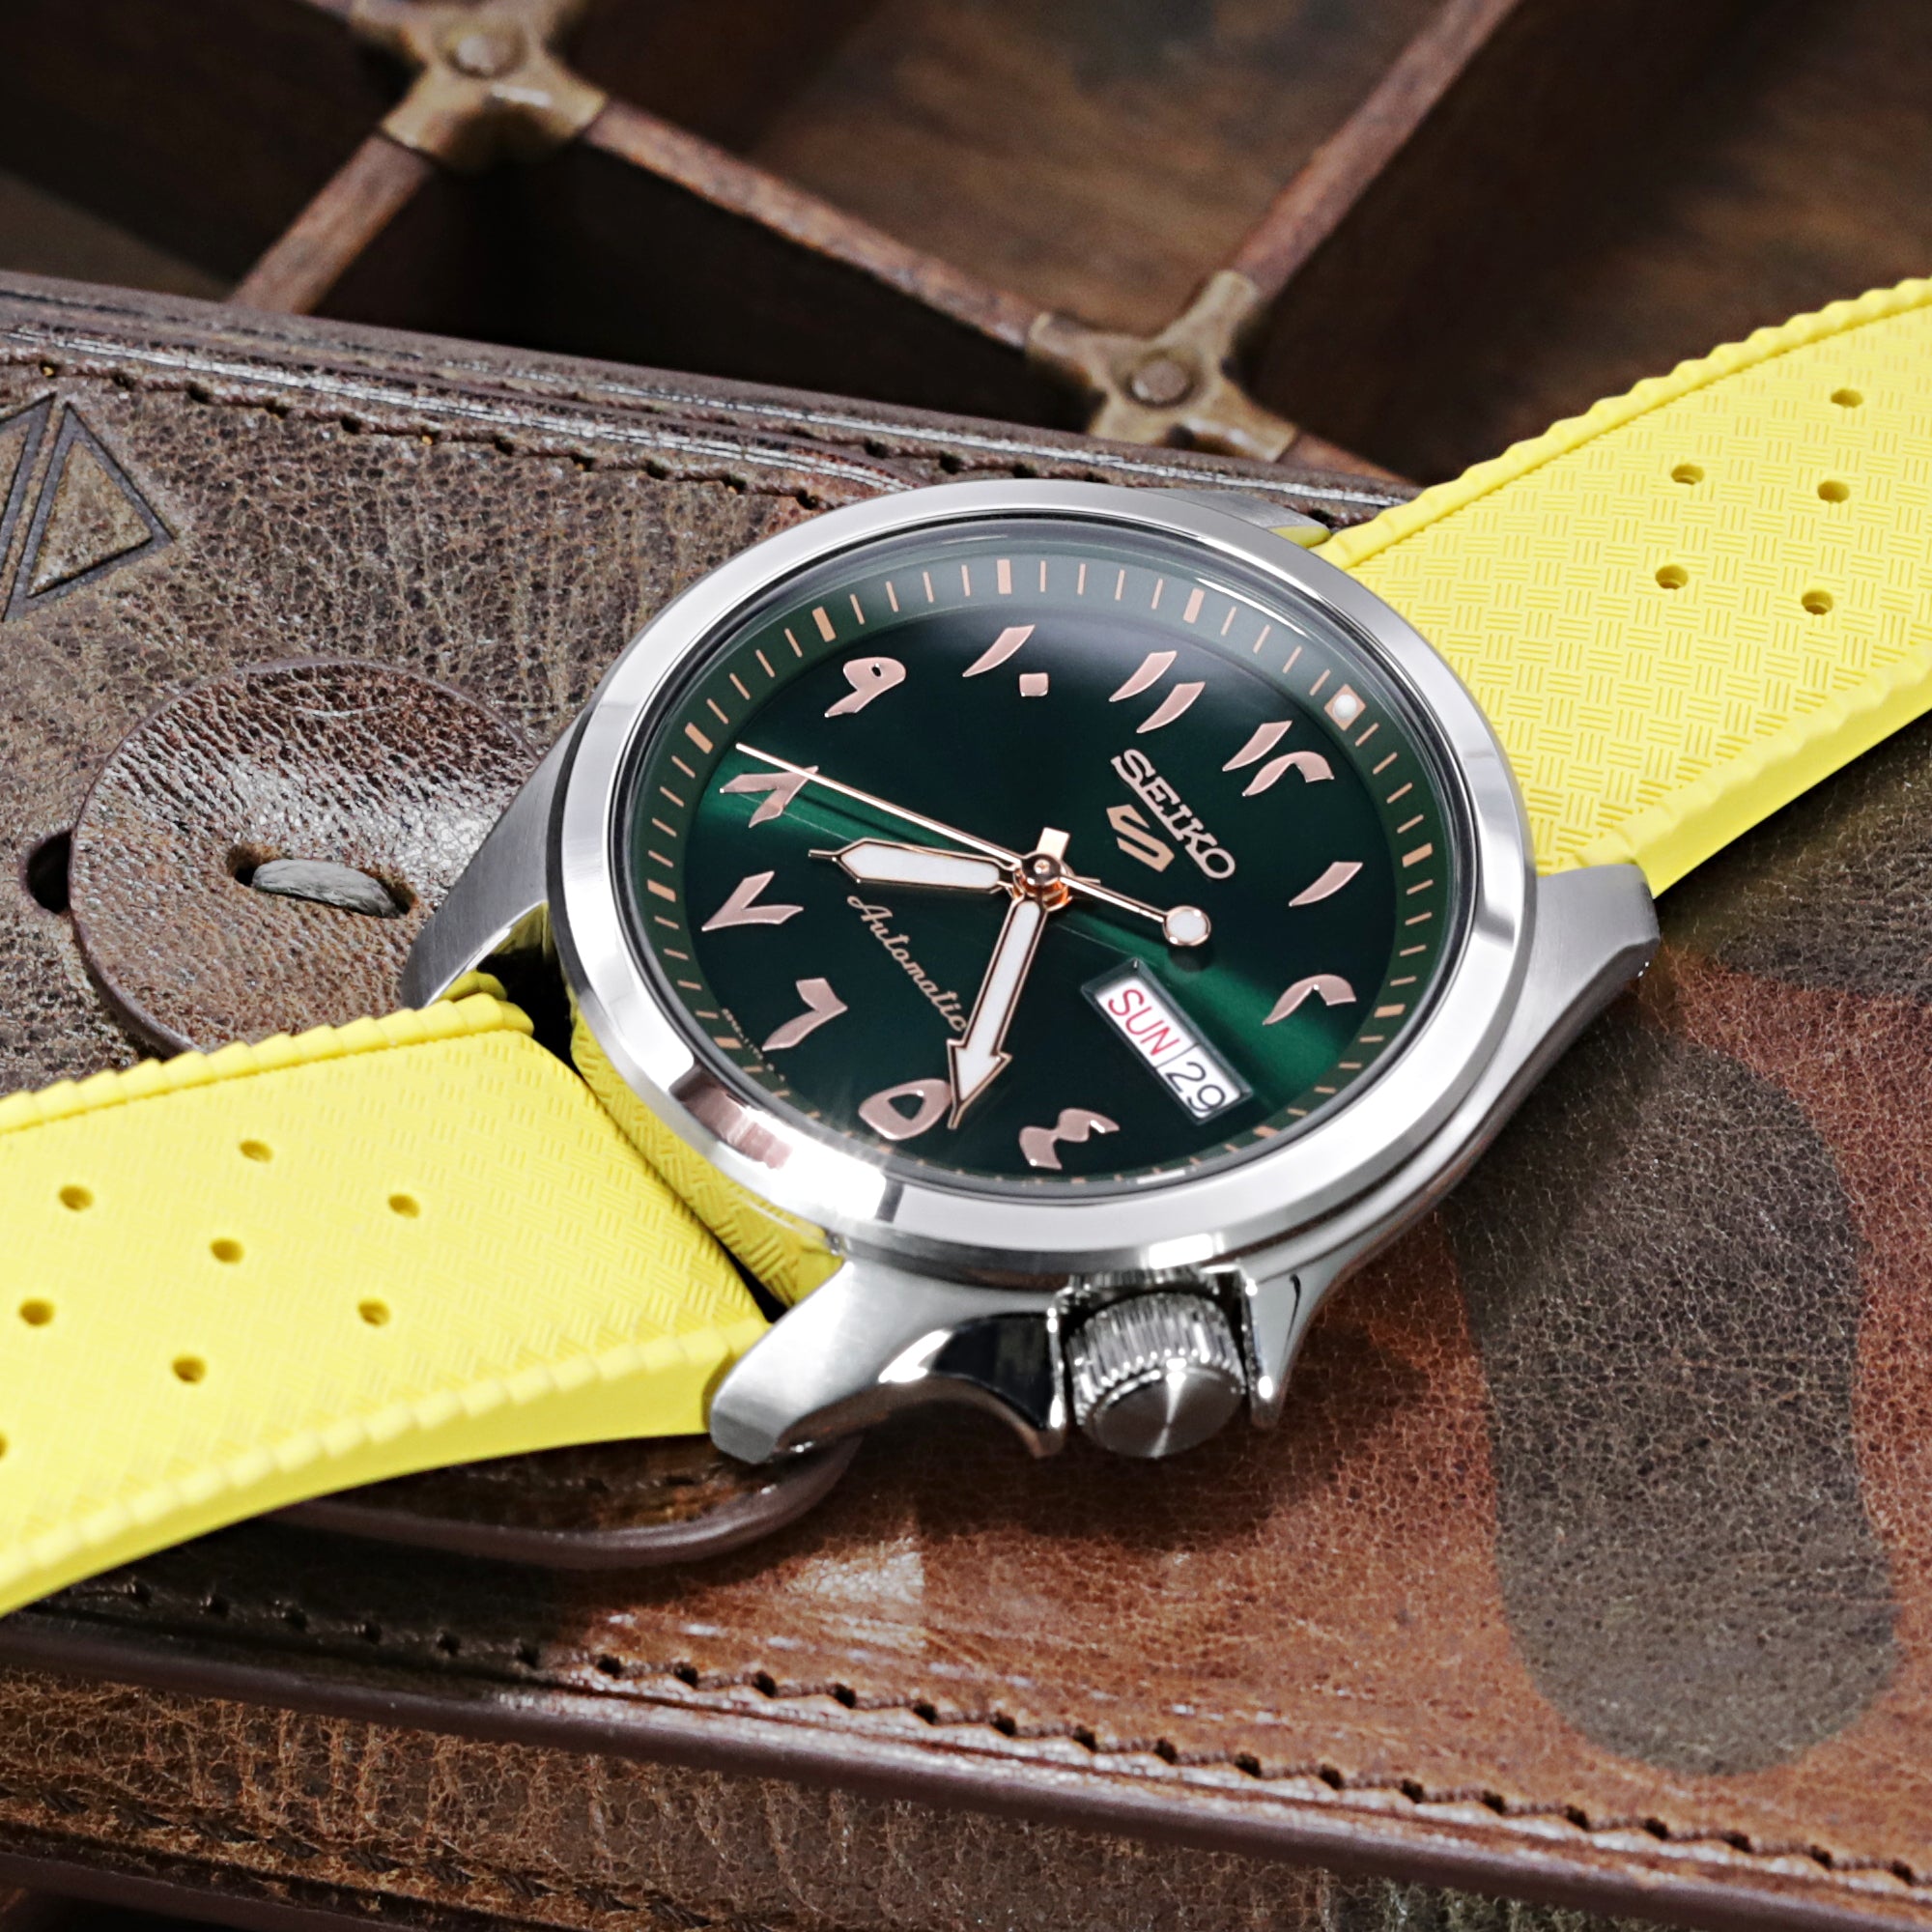 Seiko 5 Sports SRPH49K1 with all hours marks numbered and a vivid yellow rubber watch strap